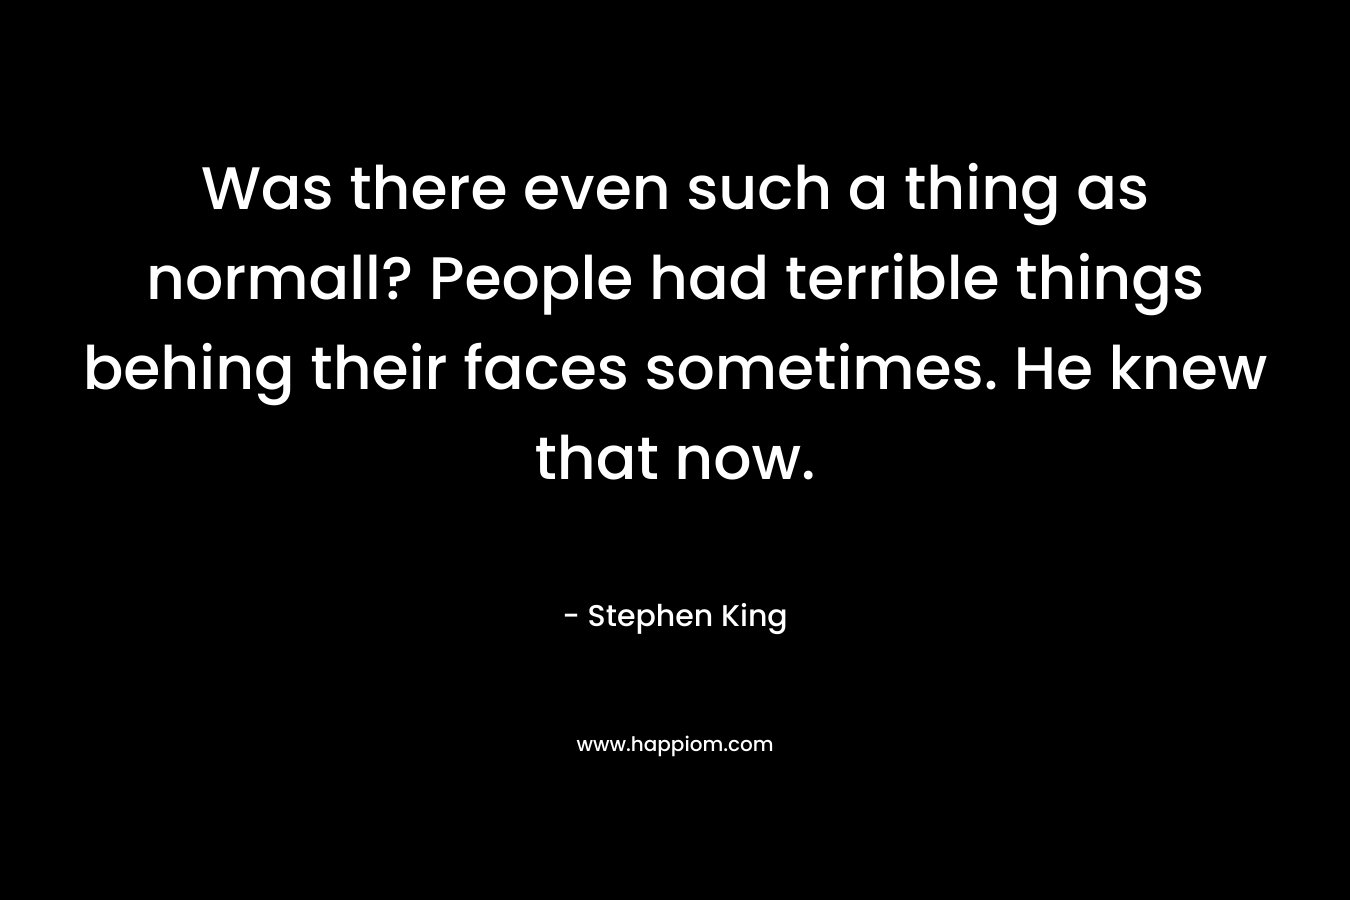 Was there even such a thing as normall? People had terrible things behing their faces sometimes. He knew that now. – Stephen King